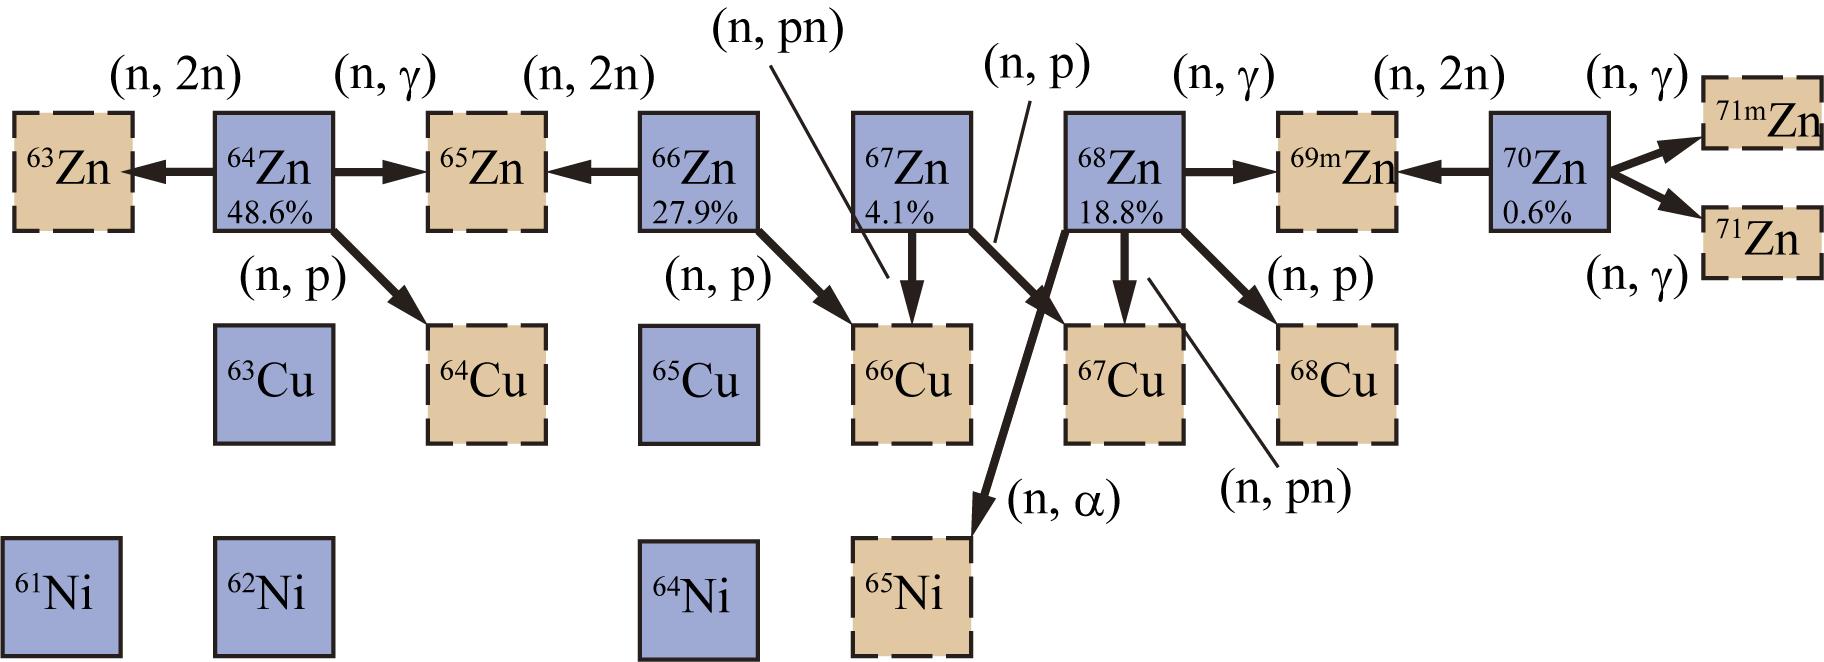 Partial nuclear chart around Zn and nuclear reactions with neutrons on a natural Zn target. Cu, Cu and Cu are produced by (n, p) reactions with high-energy neutrons on Zn, Zn and Zn, respectively. Cu, Cu and Cu are produced by (n, 2n) reactions on Zn, Zn and Zn, respectively. Cu and Cu are generated by (n, pn) reactions from Zn and Zn, respectively. High-energy neutrons could produce Ni by the Zn(n, )Ni reaction. Neutron capture also occurs.